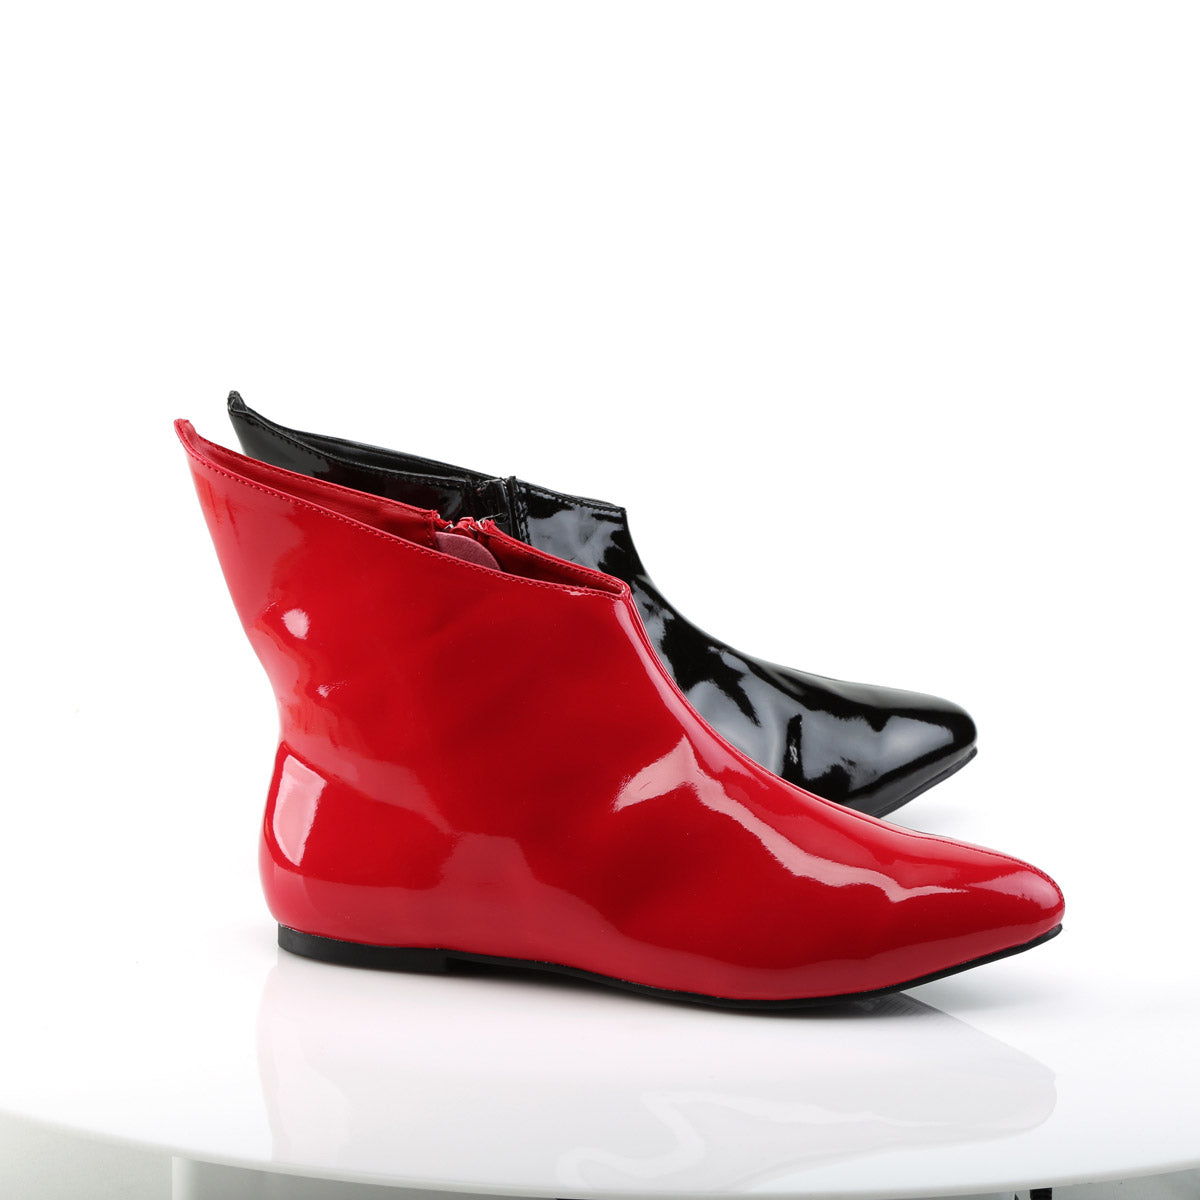 Pointed Toe Dual Colored Flat Villain Ankle Boot Blk-Red Pat Pleaser Funtasma VAIL/152HQ